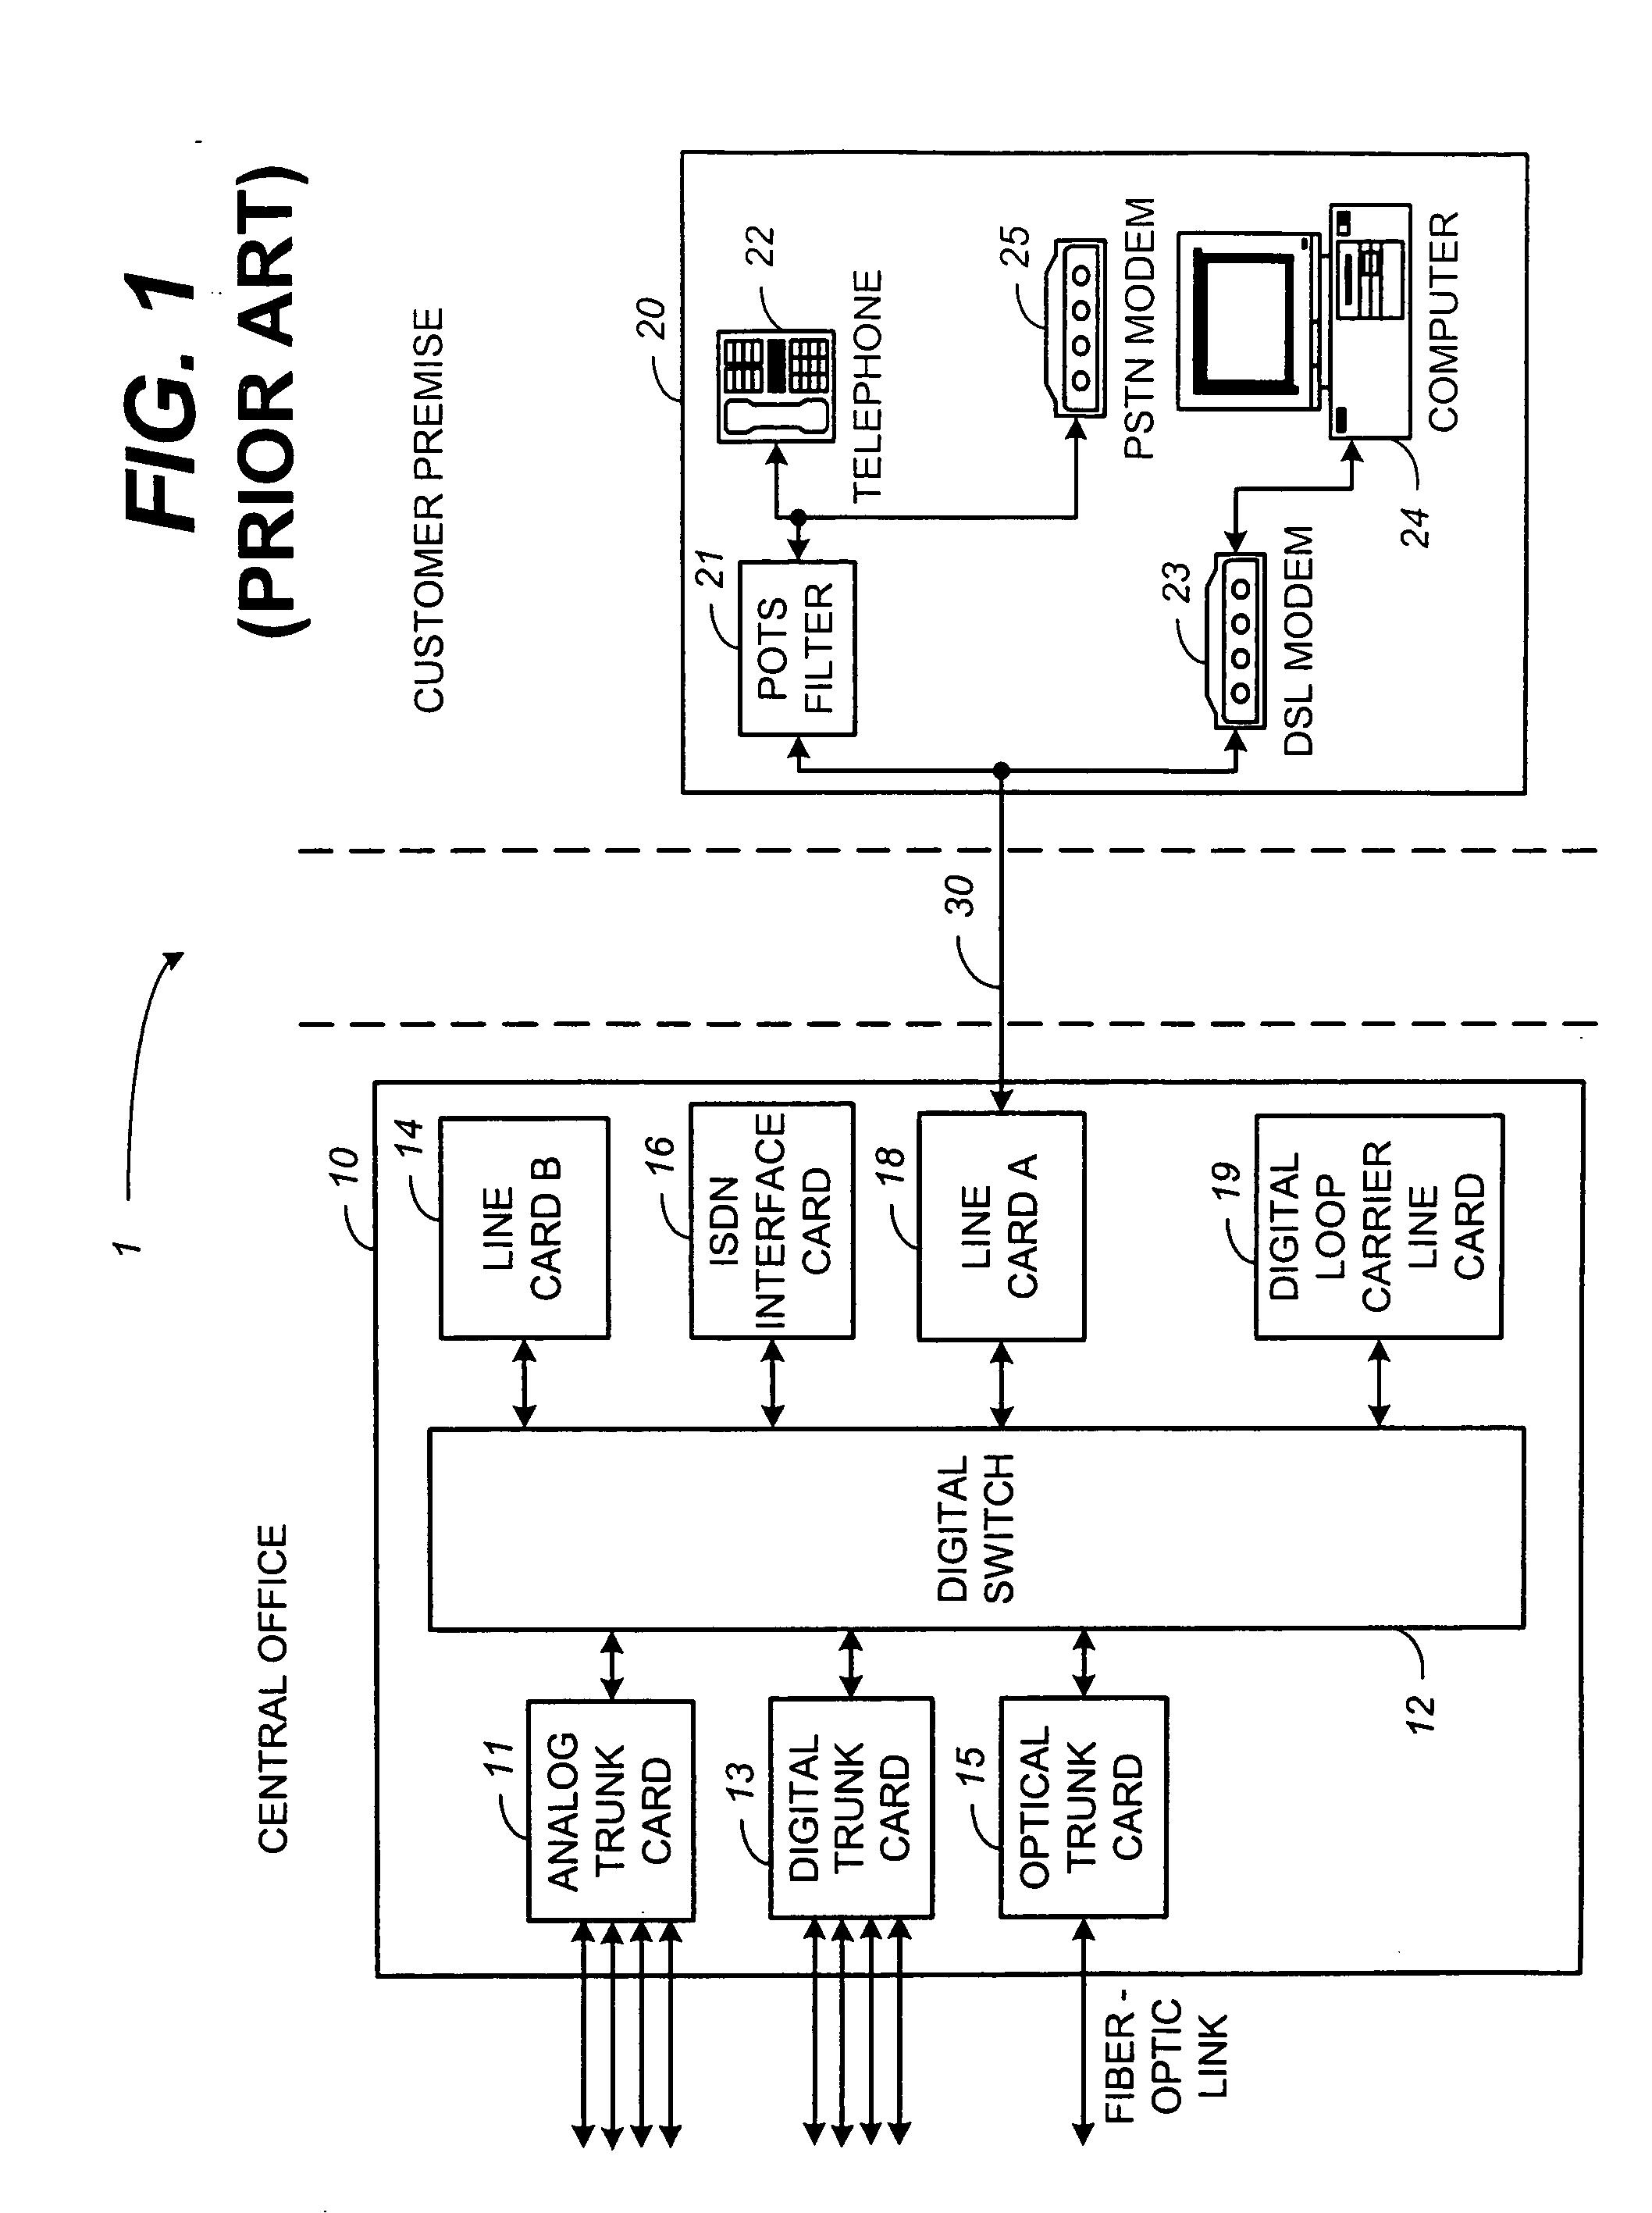 System and method for implementing a delta-sigma modulator integrity supervisor